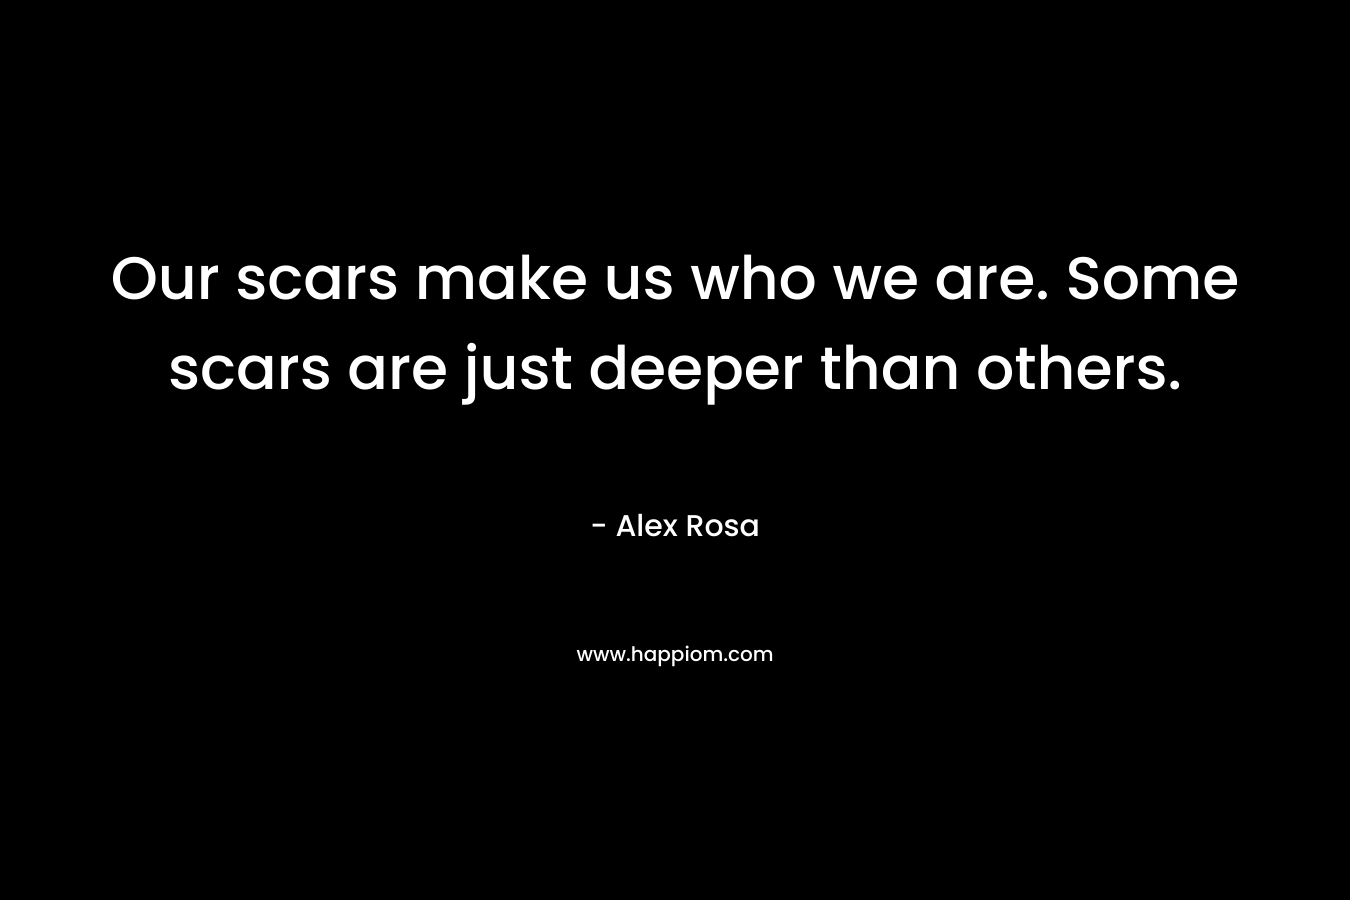 Our scars make us who we are. Some scars are just deeper than others. – Alex Rosa